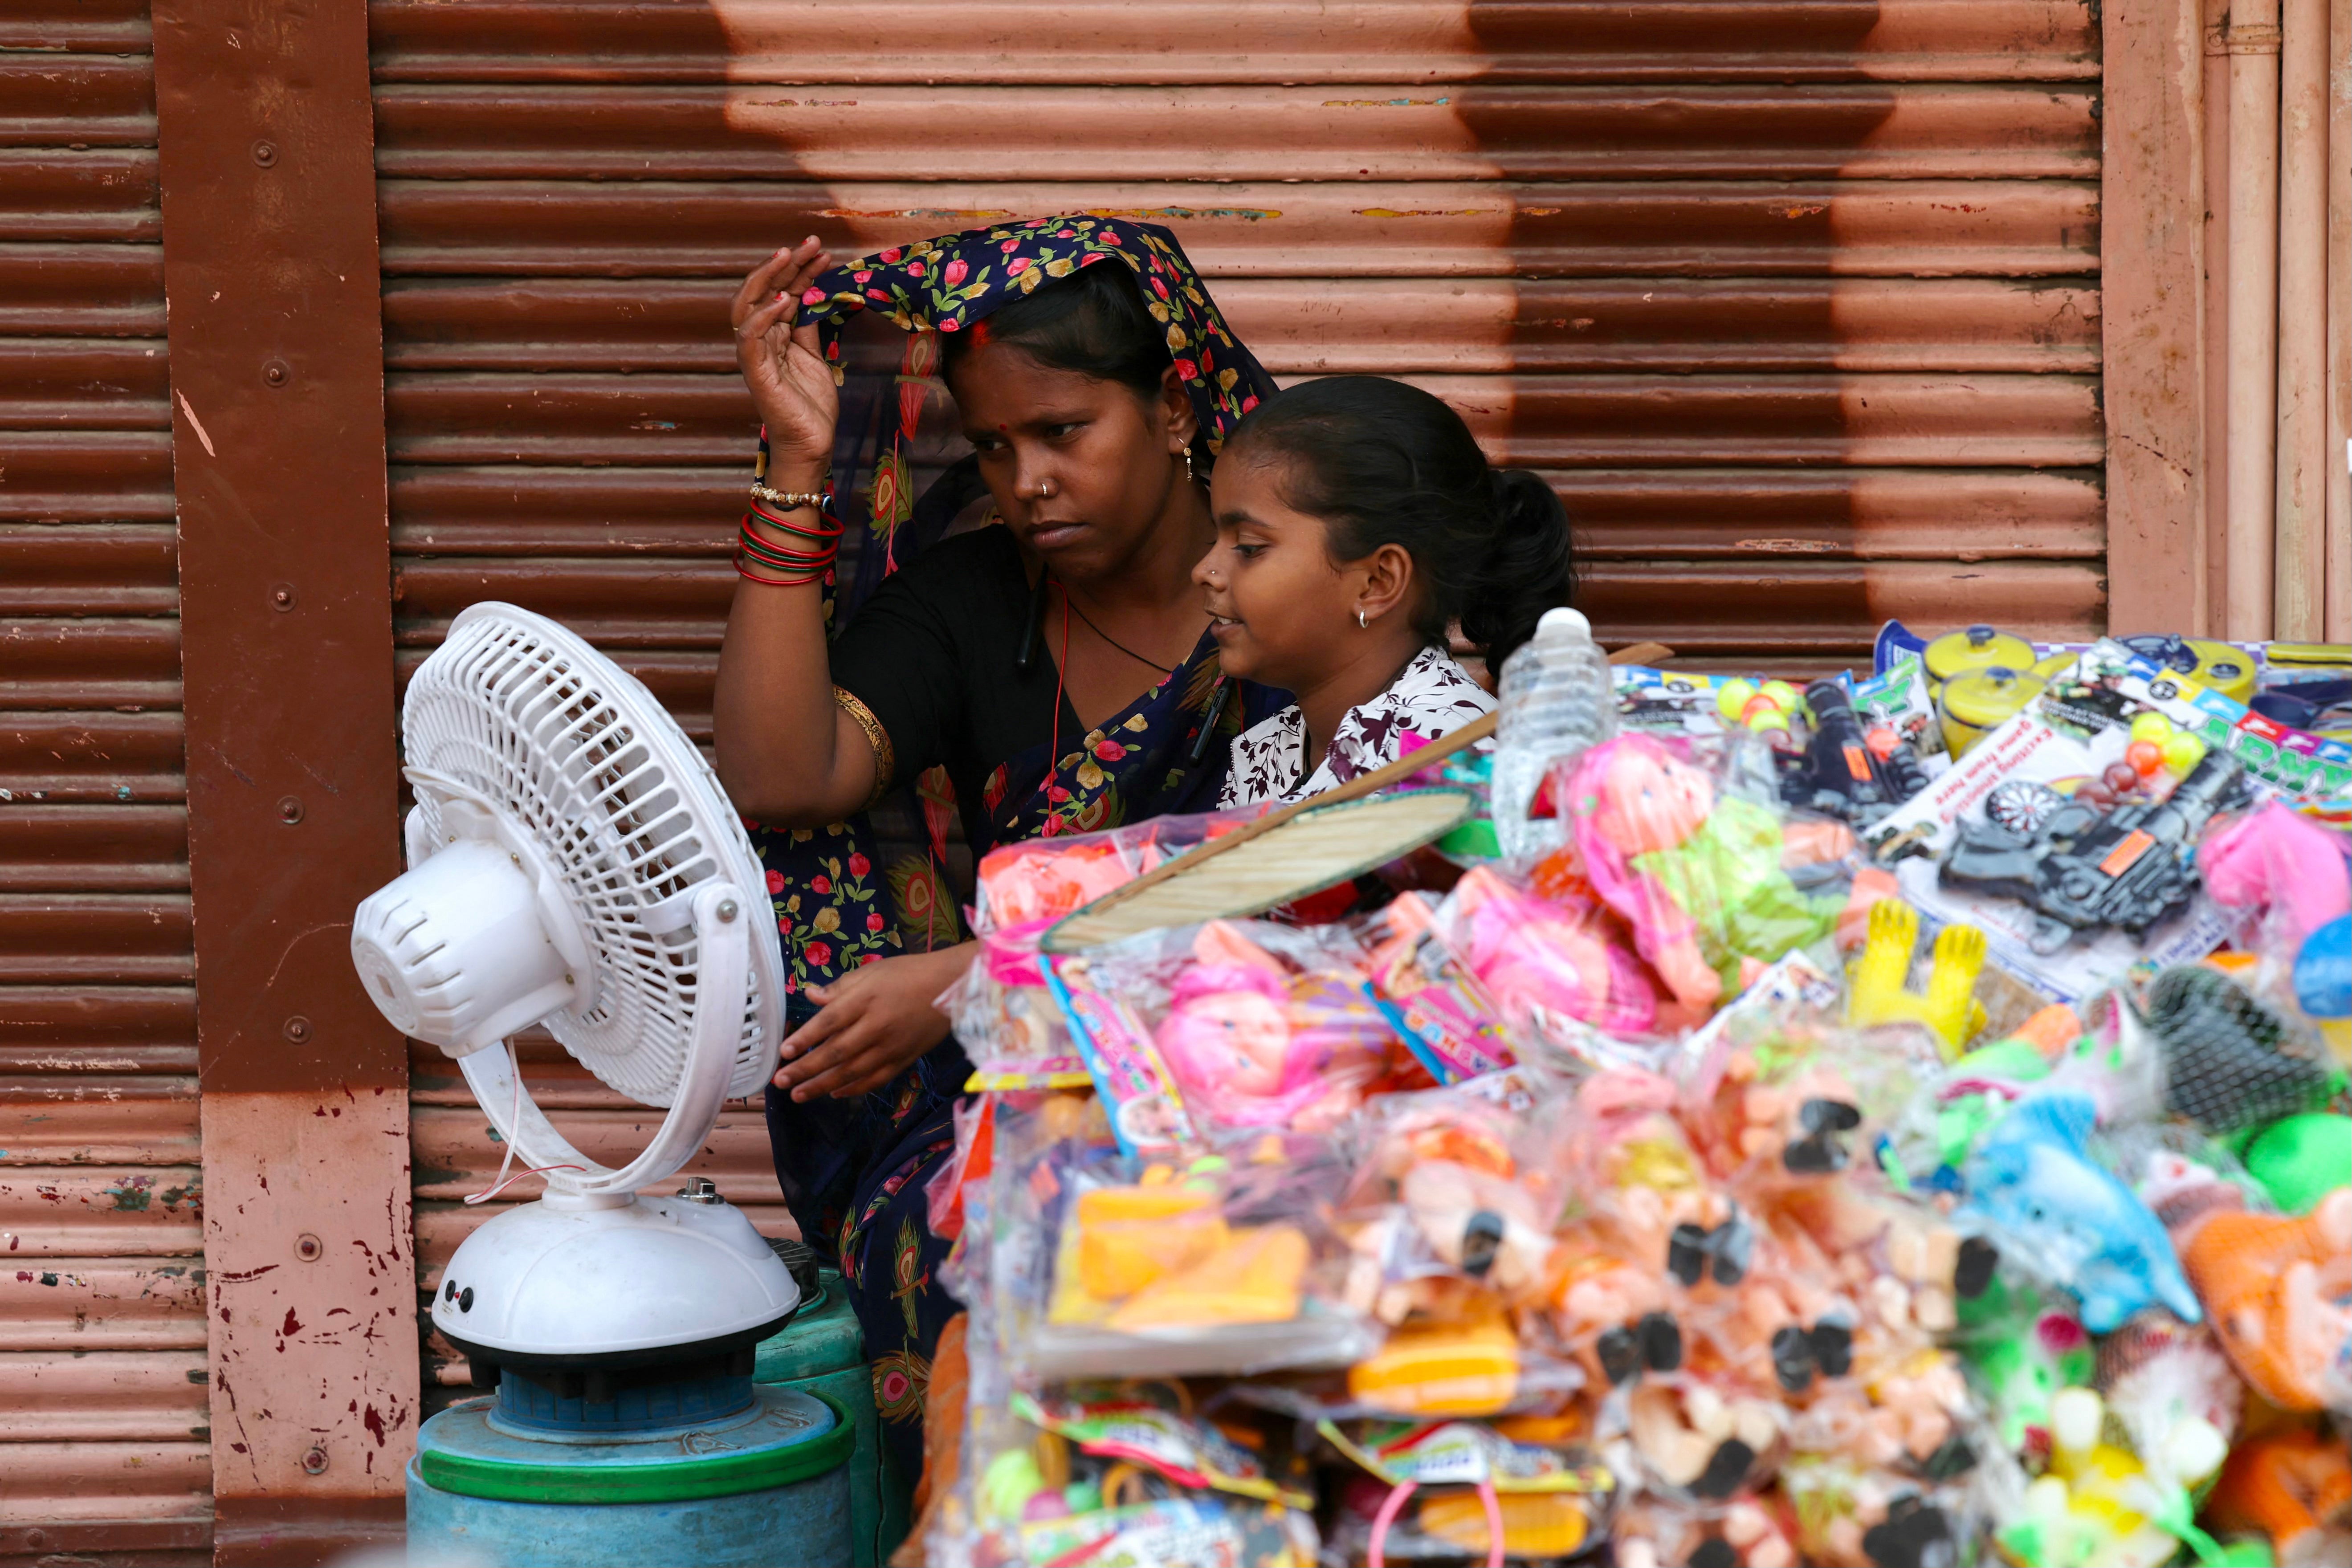 People sit in front of table fans to cool off on a hot summer afternoon in Varanasi.